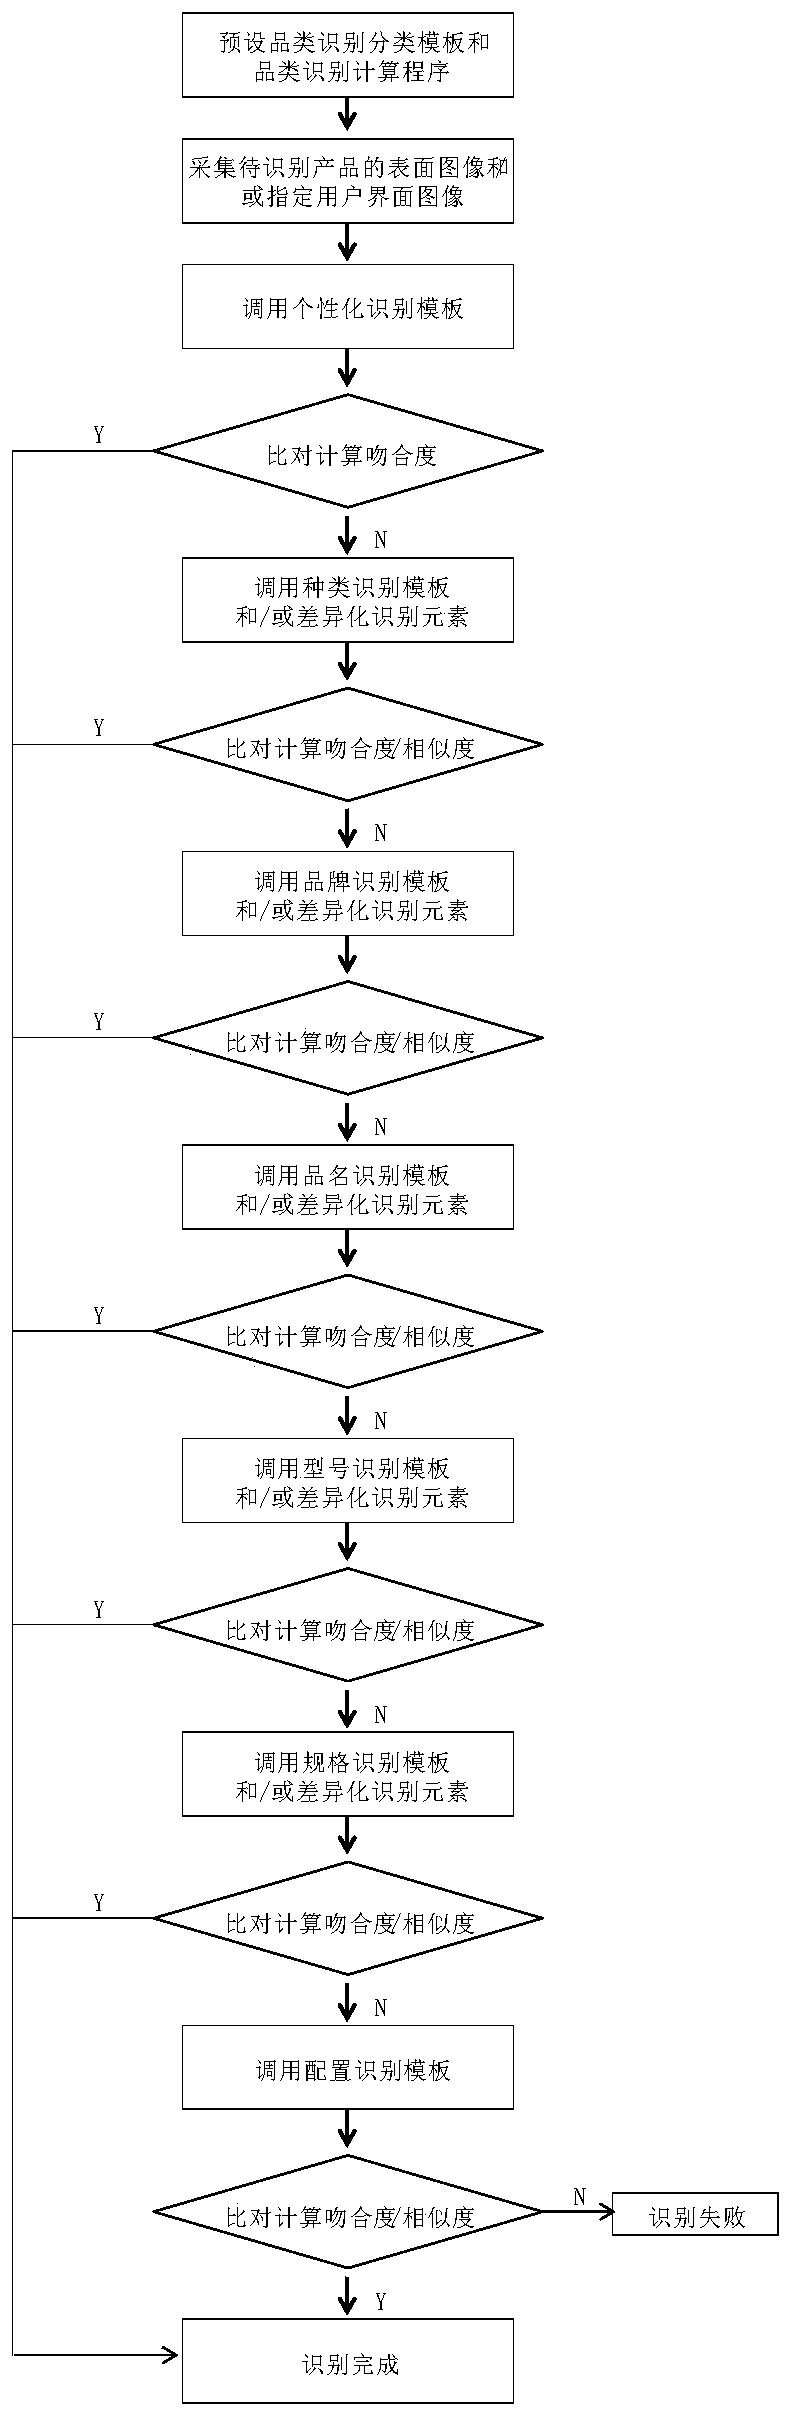 Electronic product category identification and defect identification method and application thereof